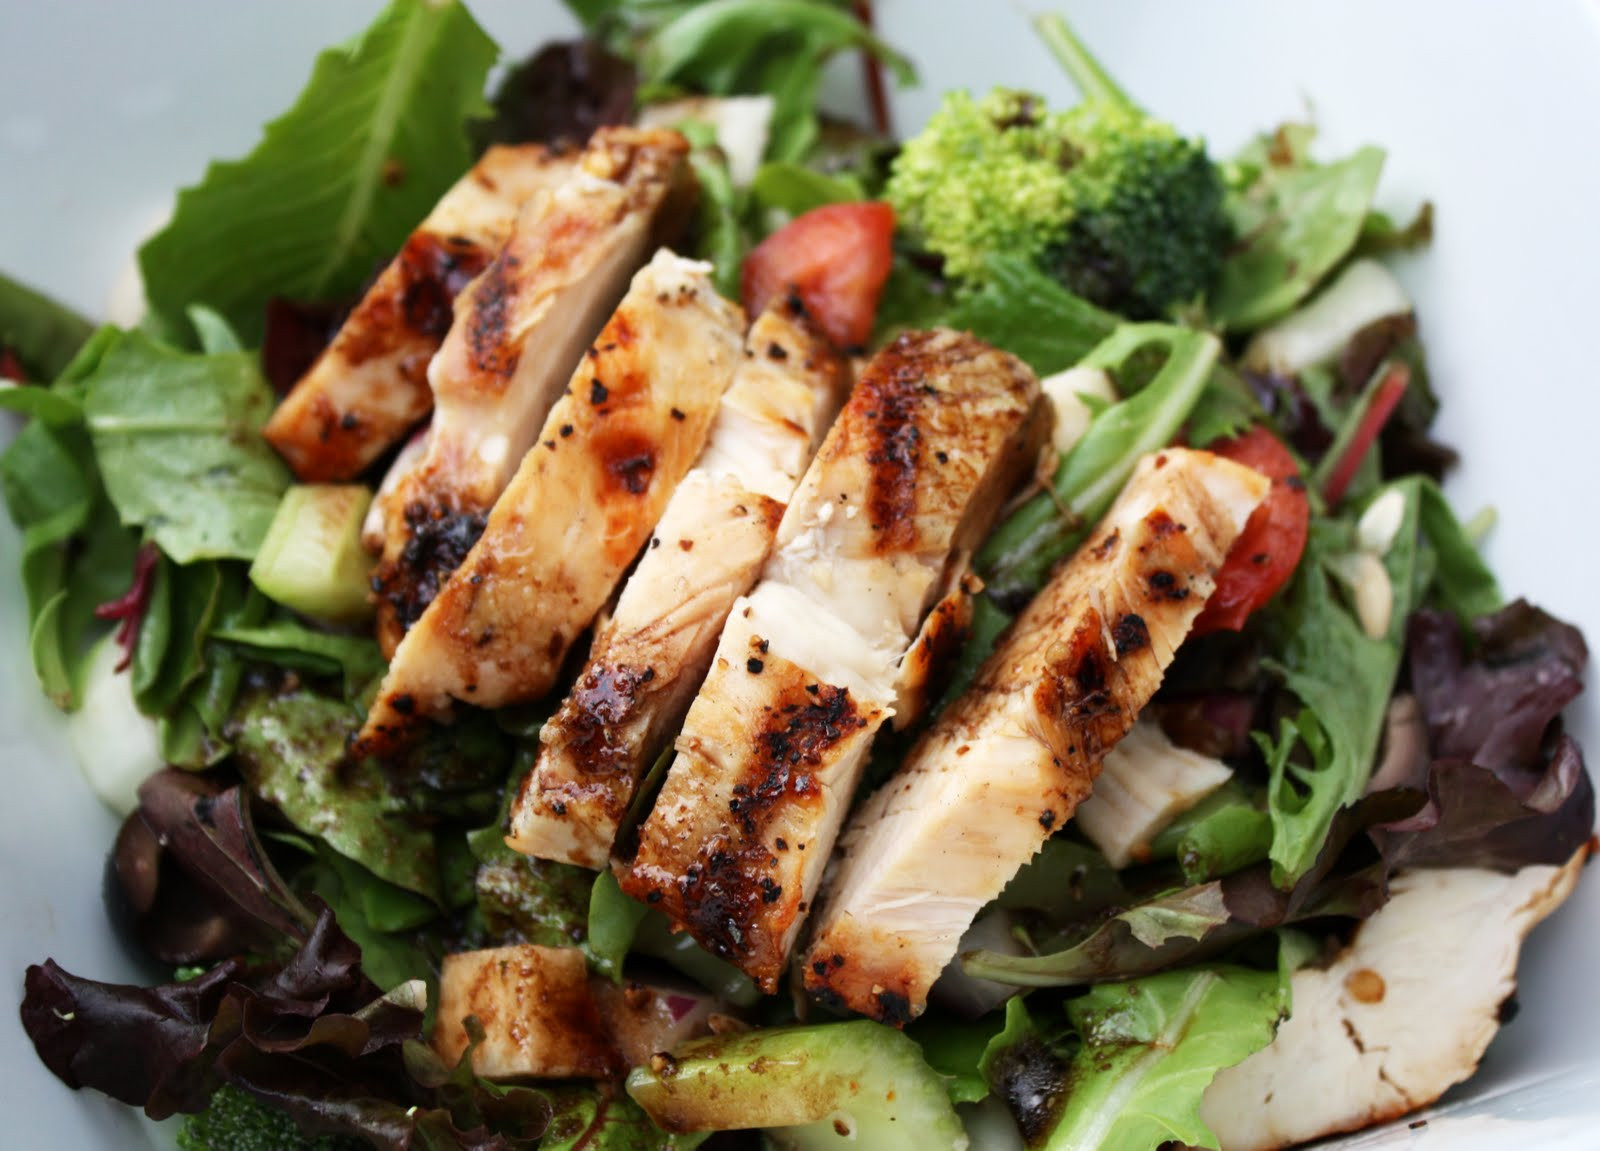 Healthy Grilled Chicken Salad
 Super Simple Salad with Grilled Chicken